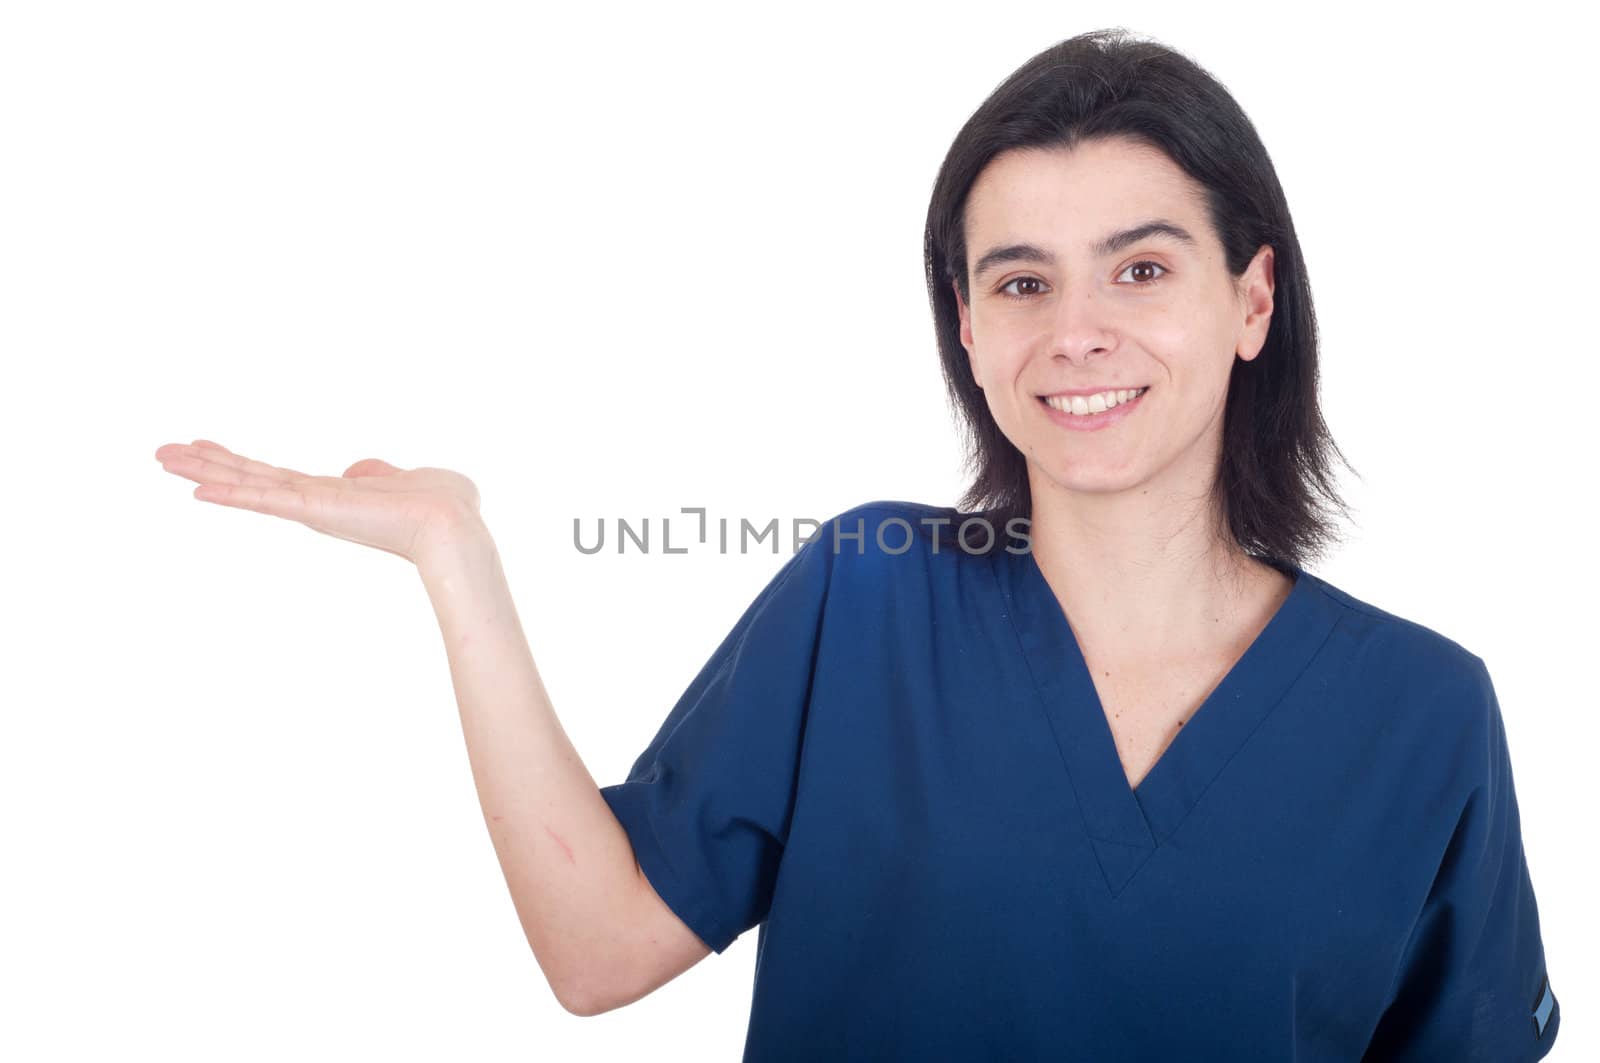 smiling young female doctor showing copy space (isolated on white background)